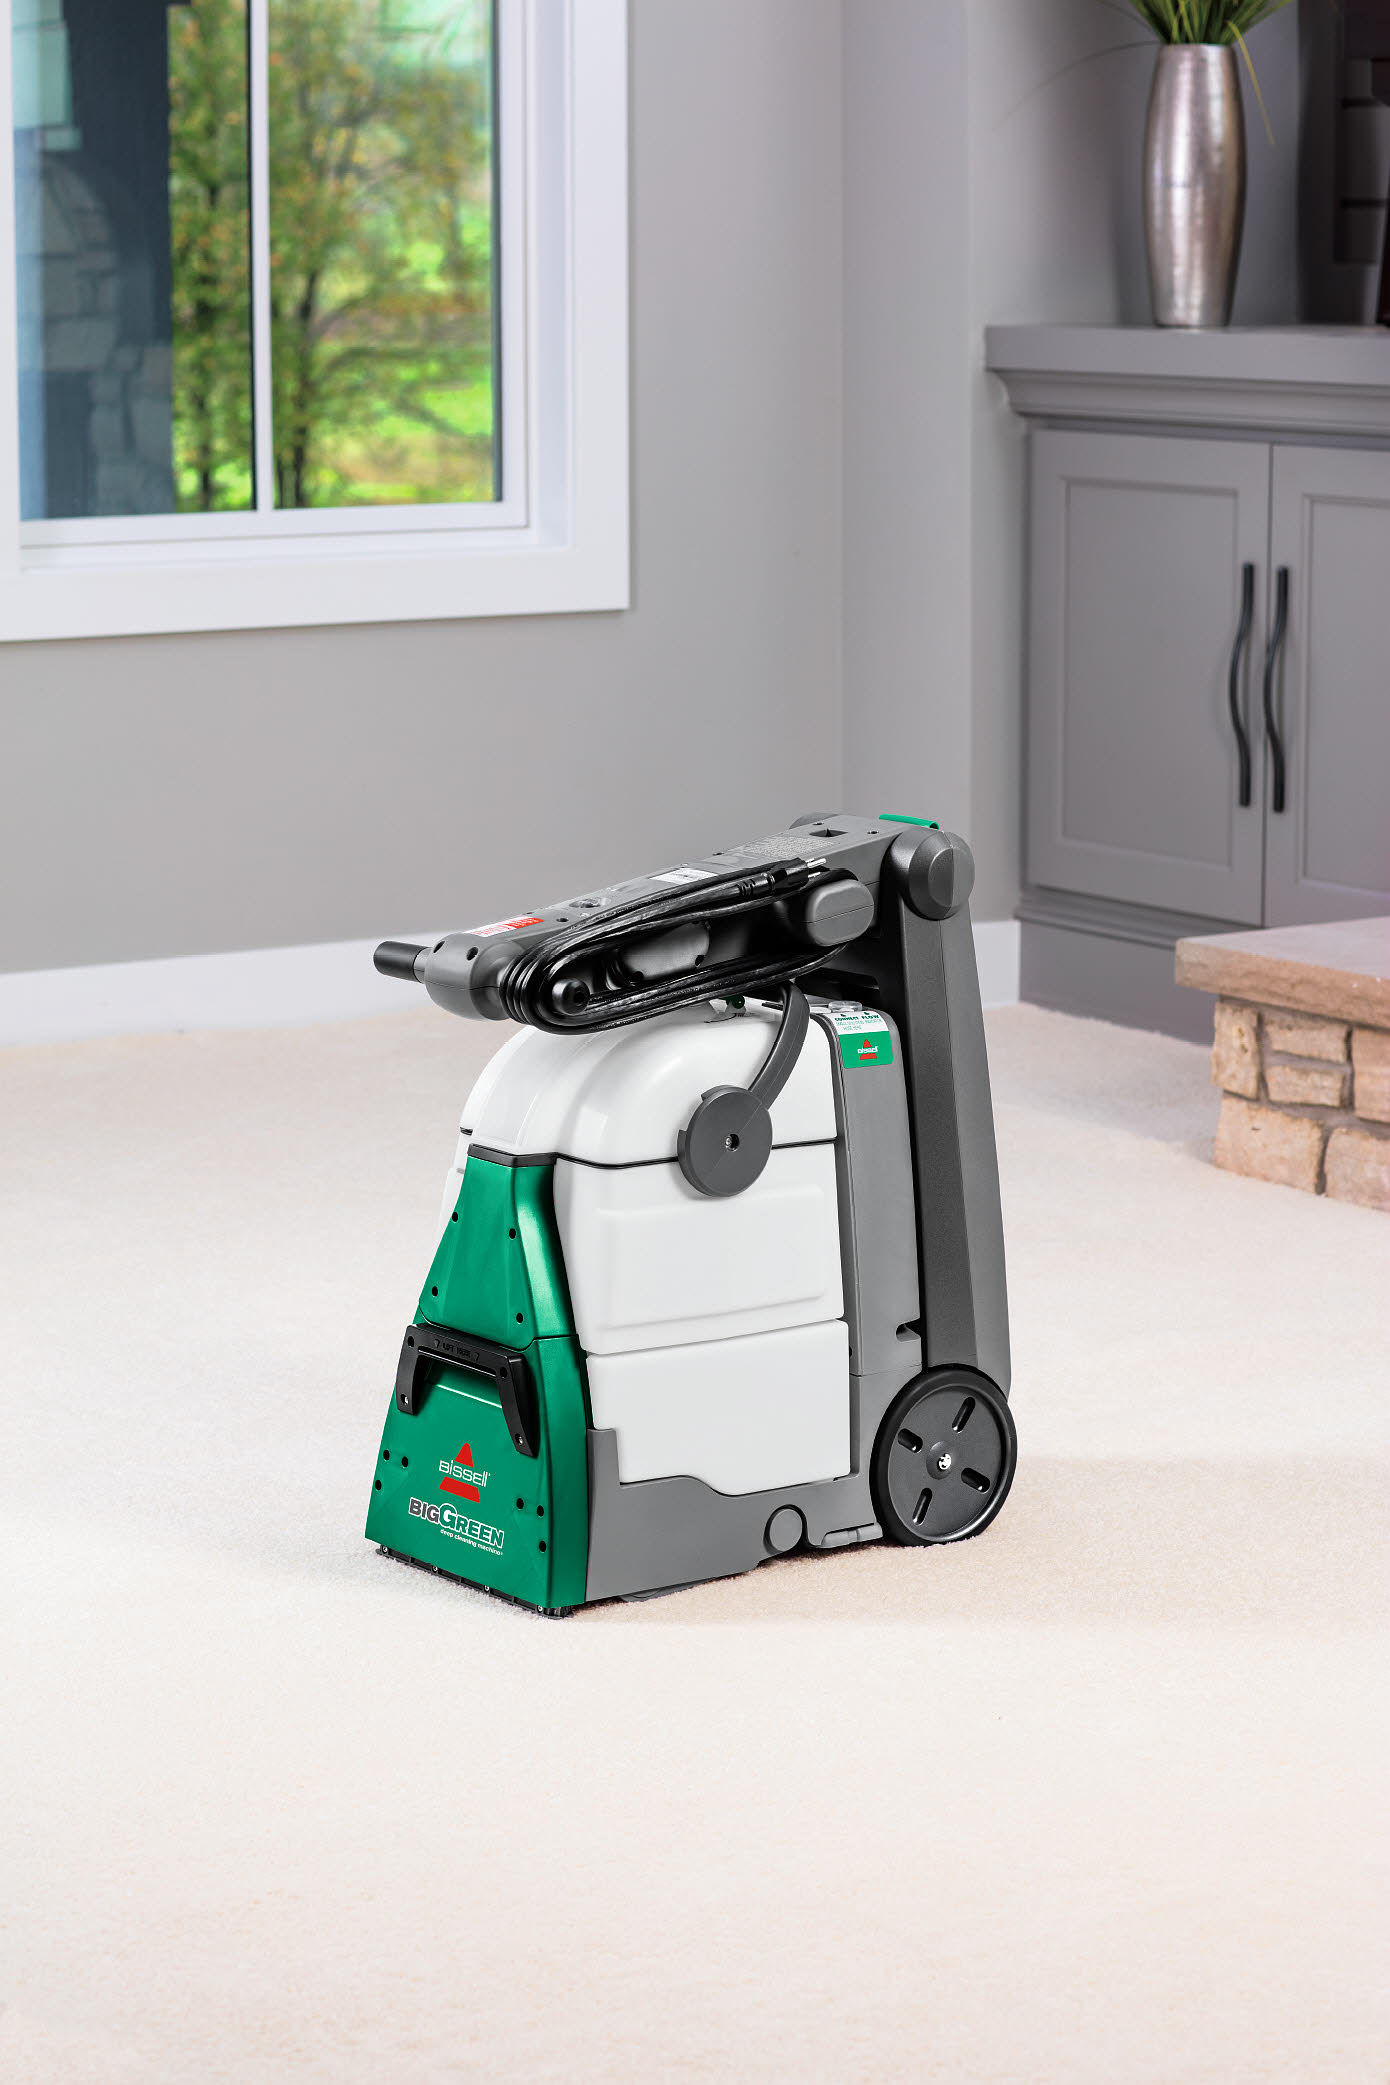 BISSELL Big Green Machine Professional Carpet Cleaner, 86T3 - image 11 of 20